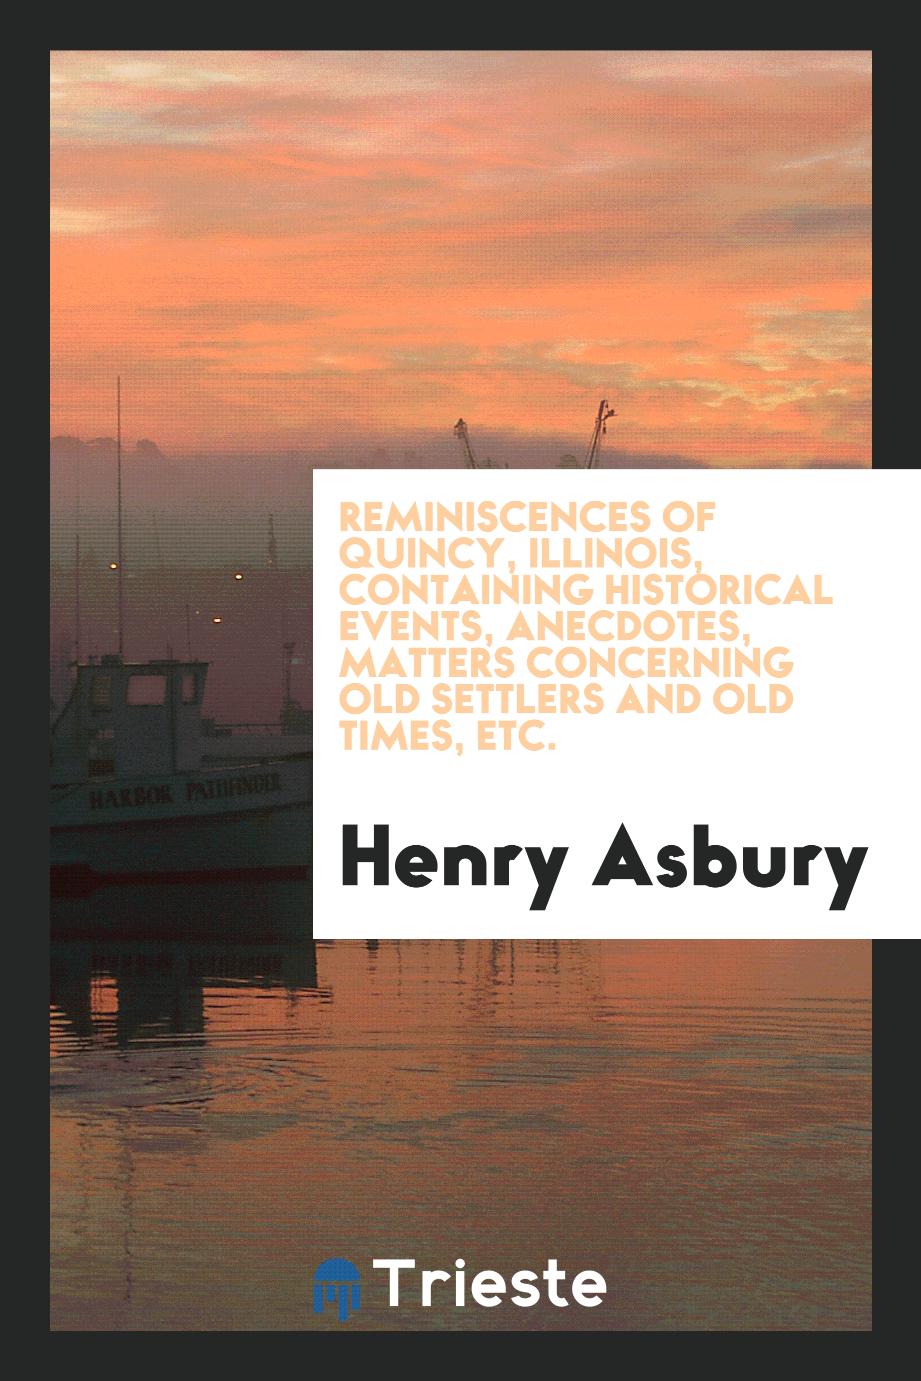 Reminiscences of Quincy, Illinois, containing historical events, anecdotes, matters concerning old settlers and old times, etc.